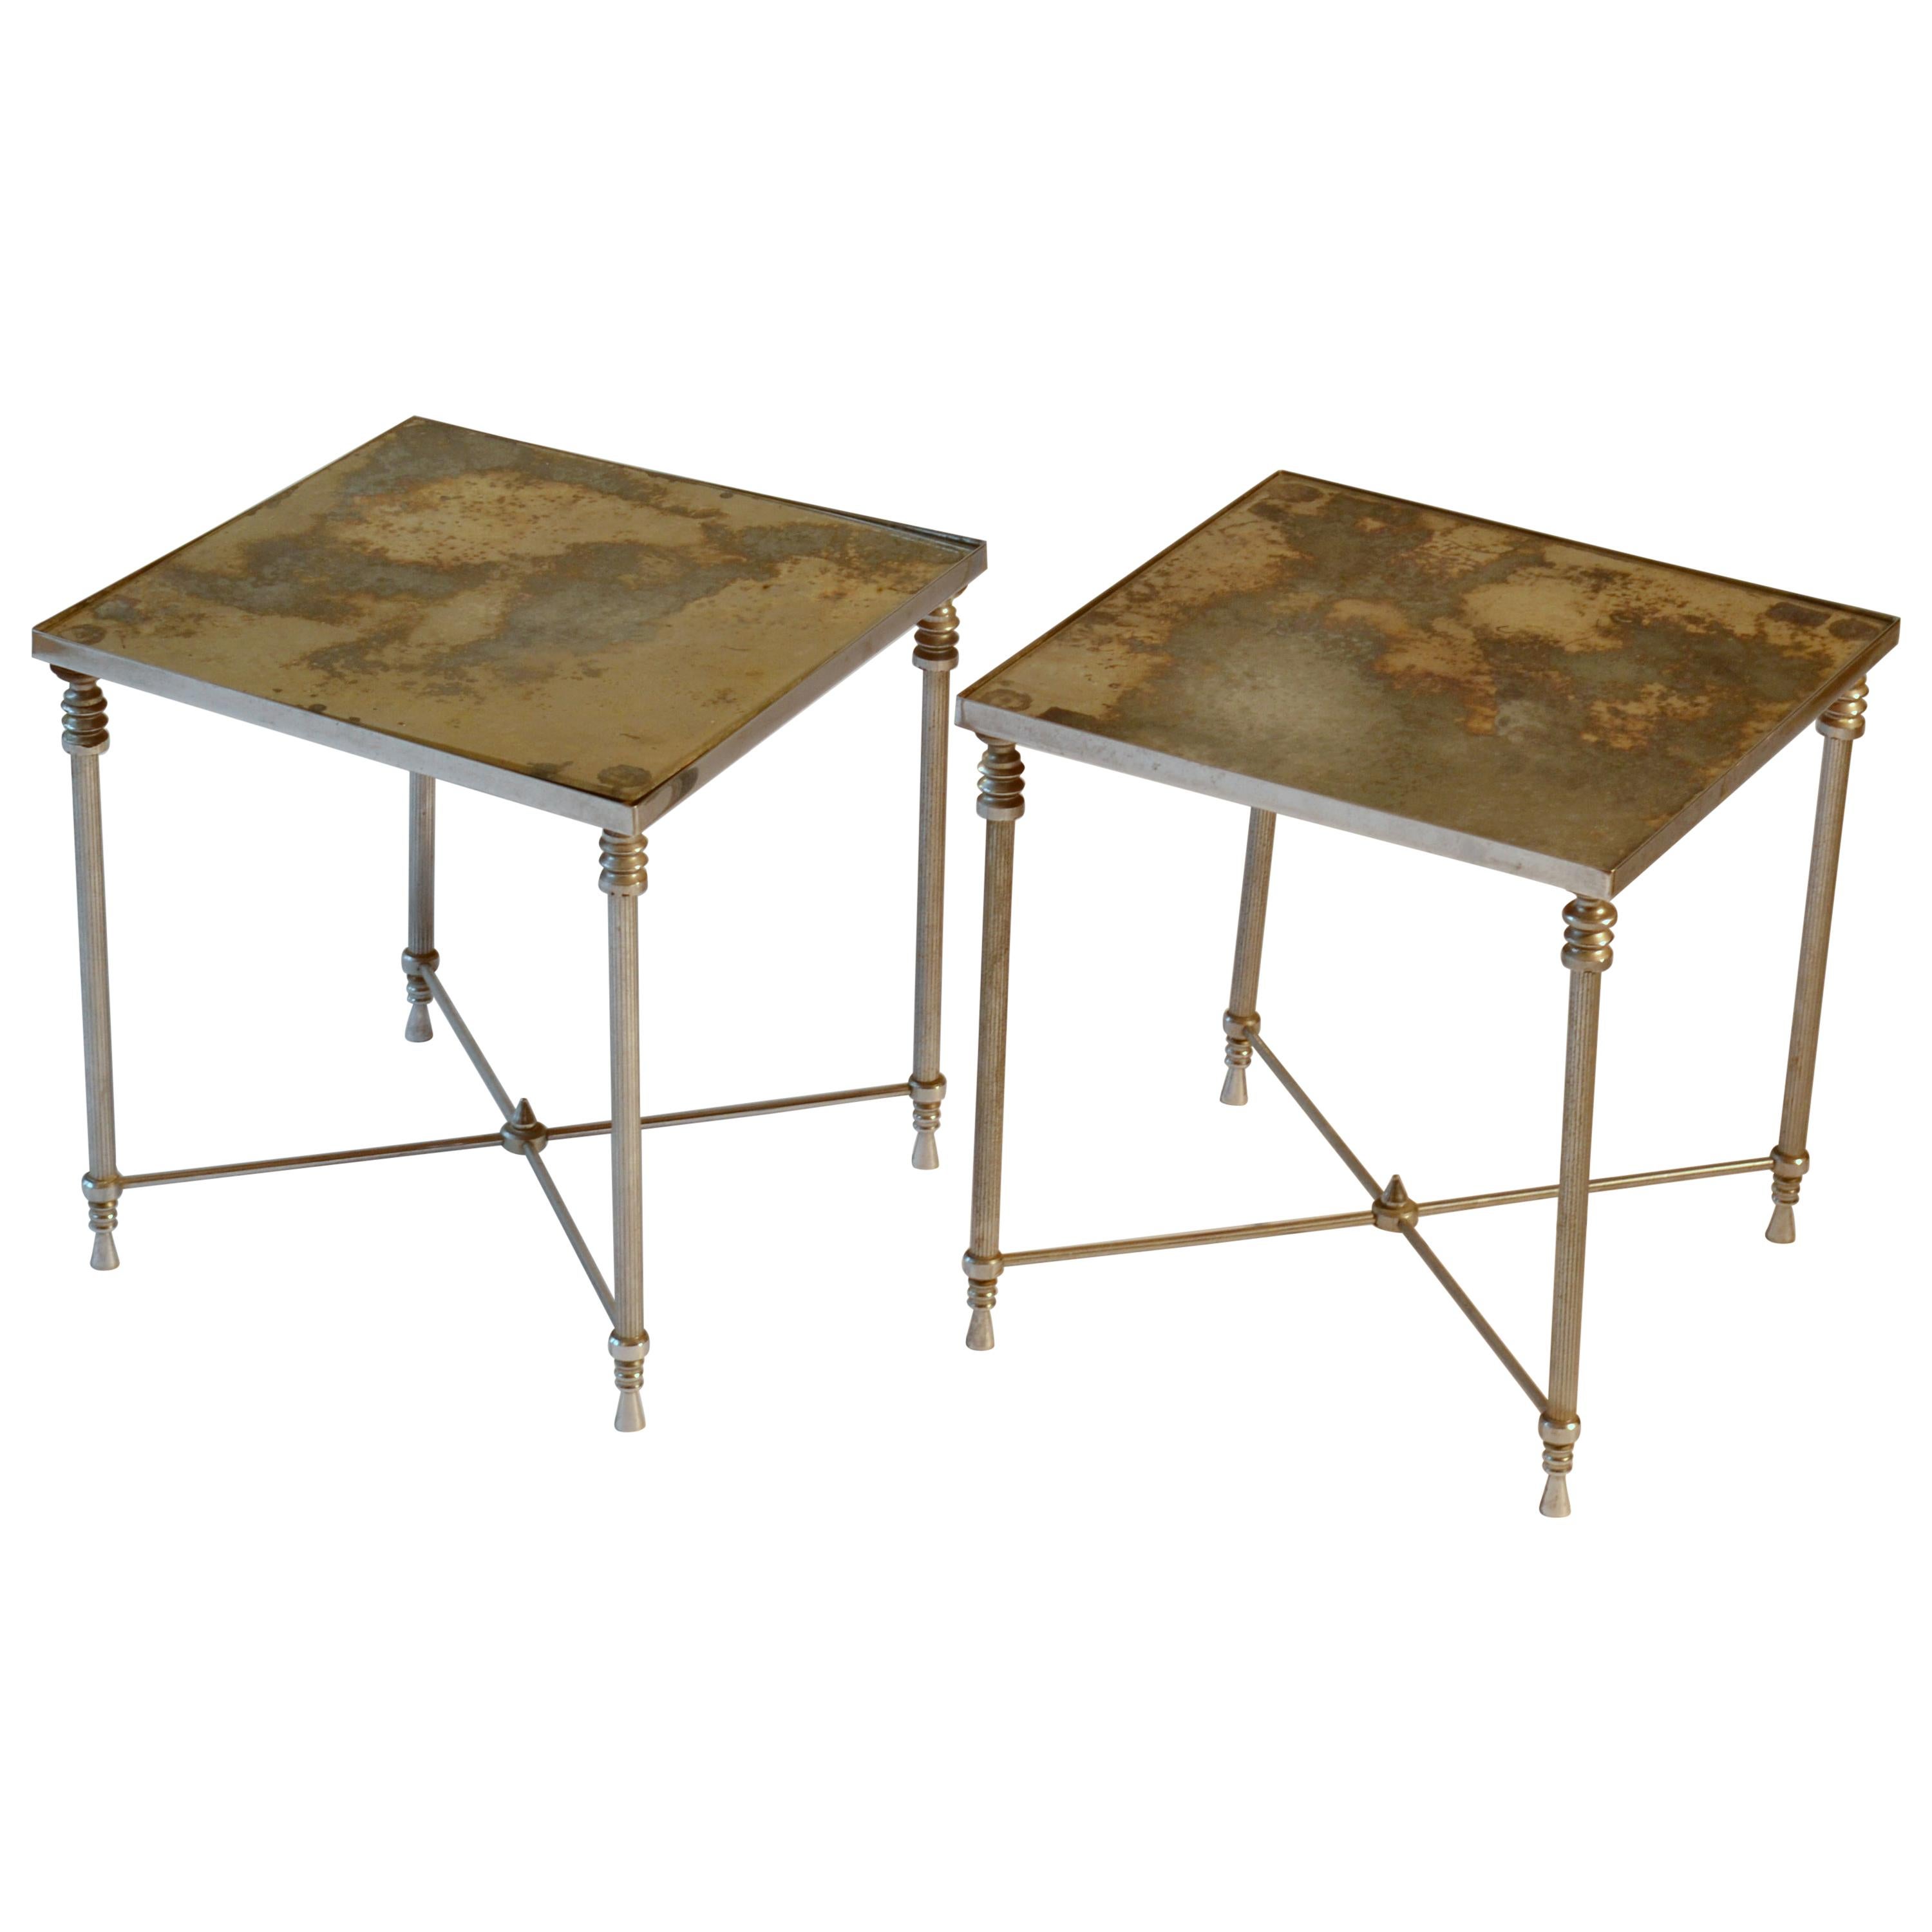 Pair of Regency Square Side Tables with Distressed Mirror Tops